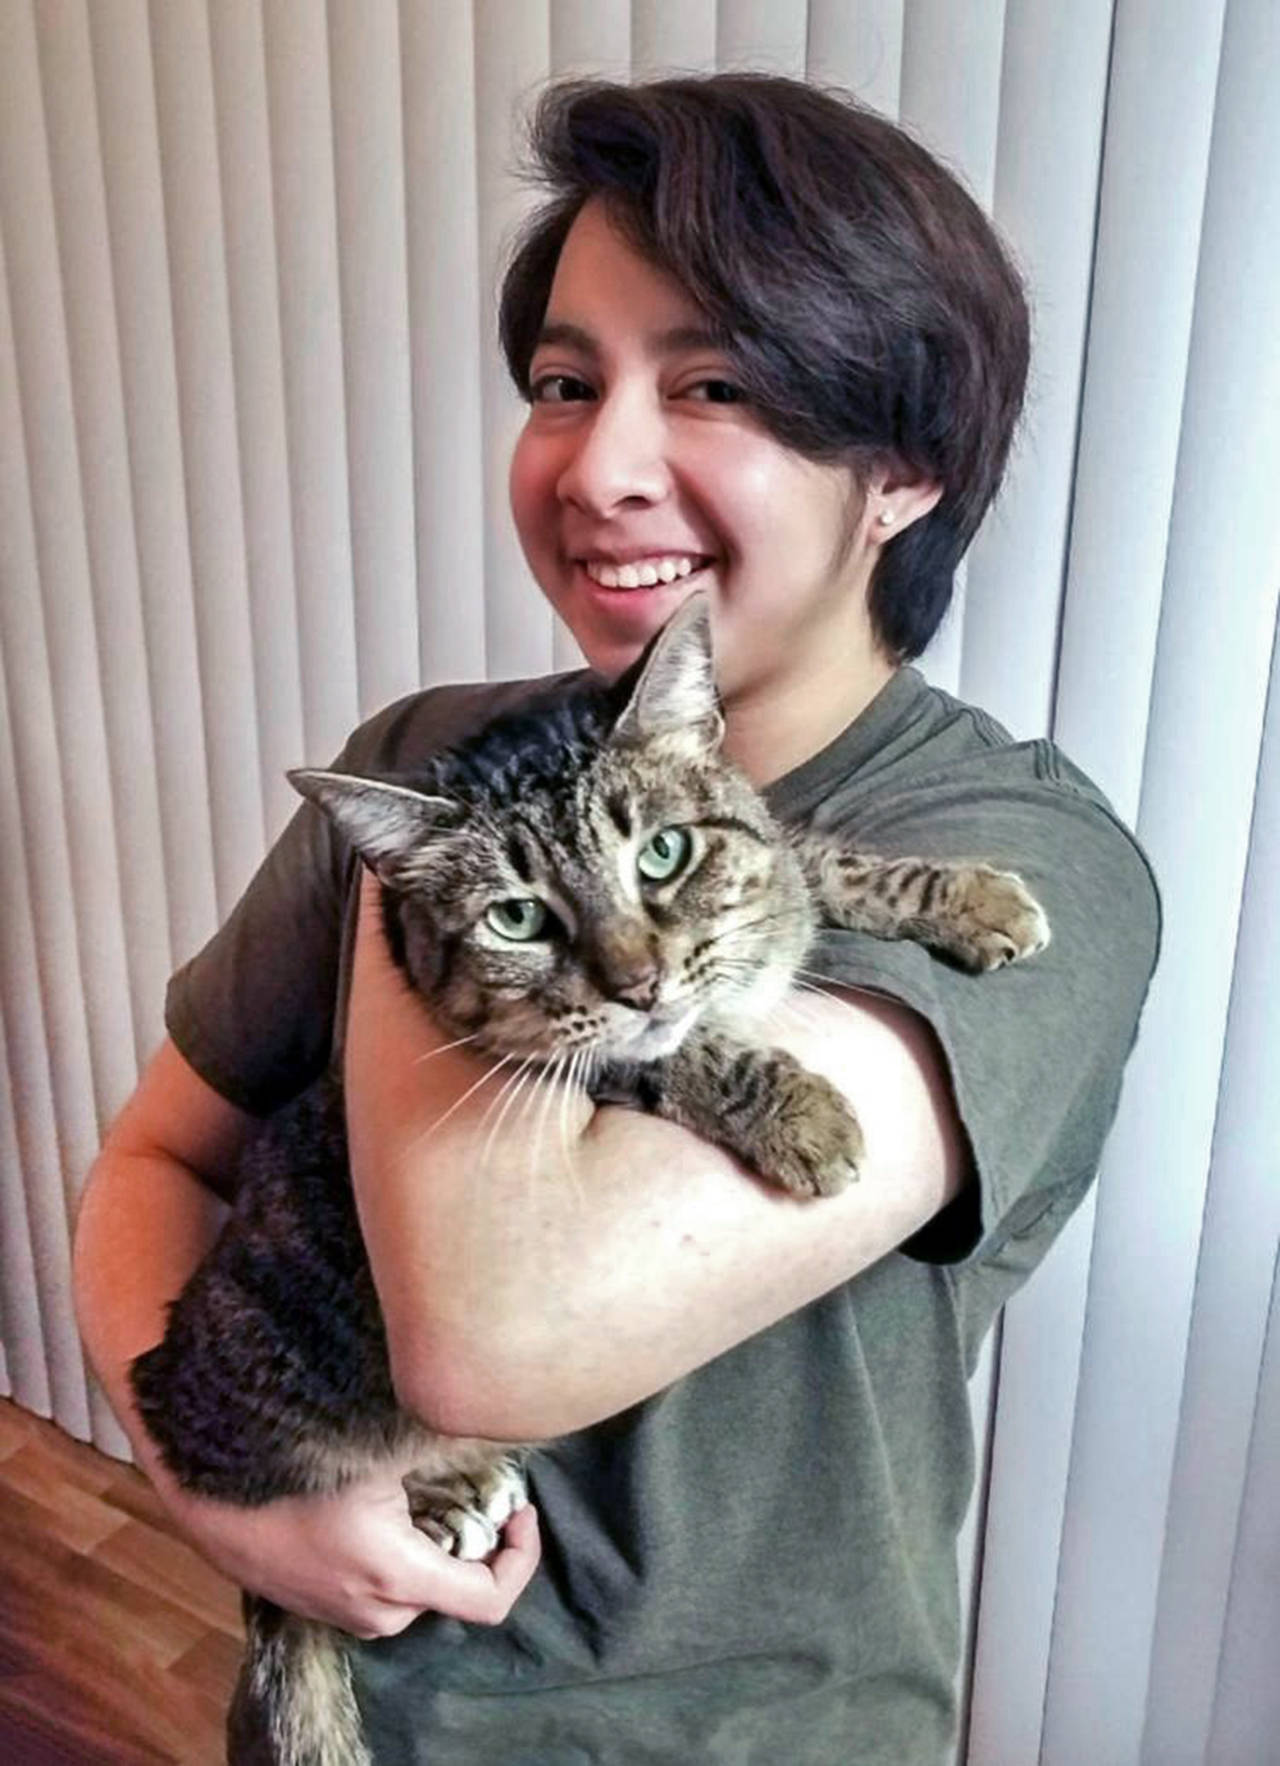 Aberdeen family helps reunite cat with Oregon owners | The Daily World